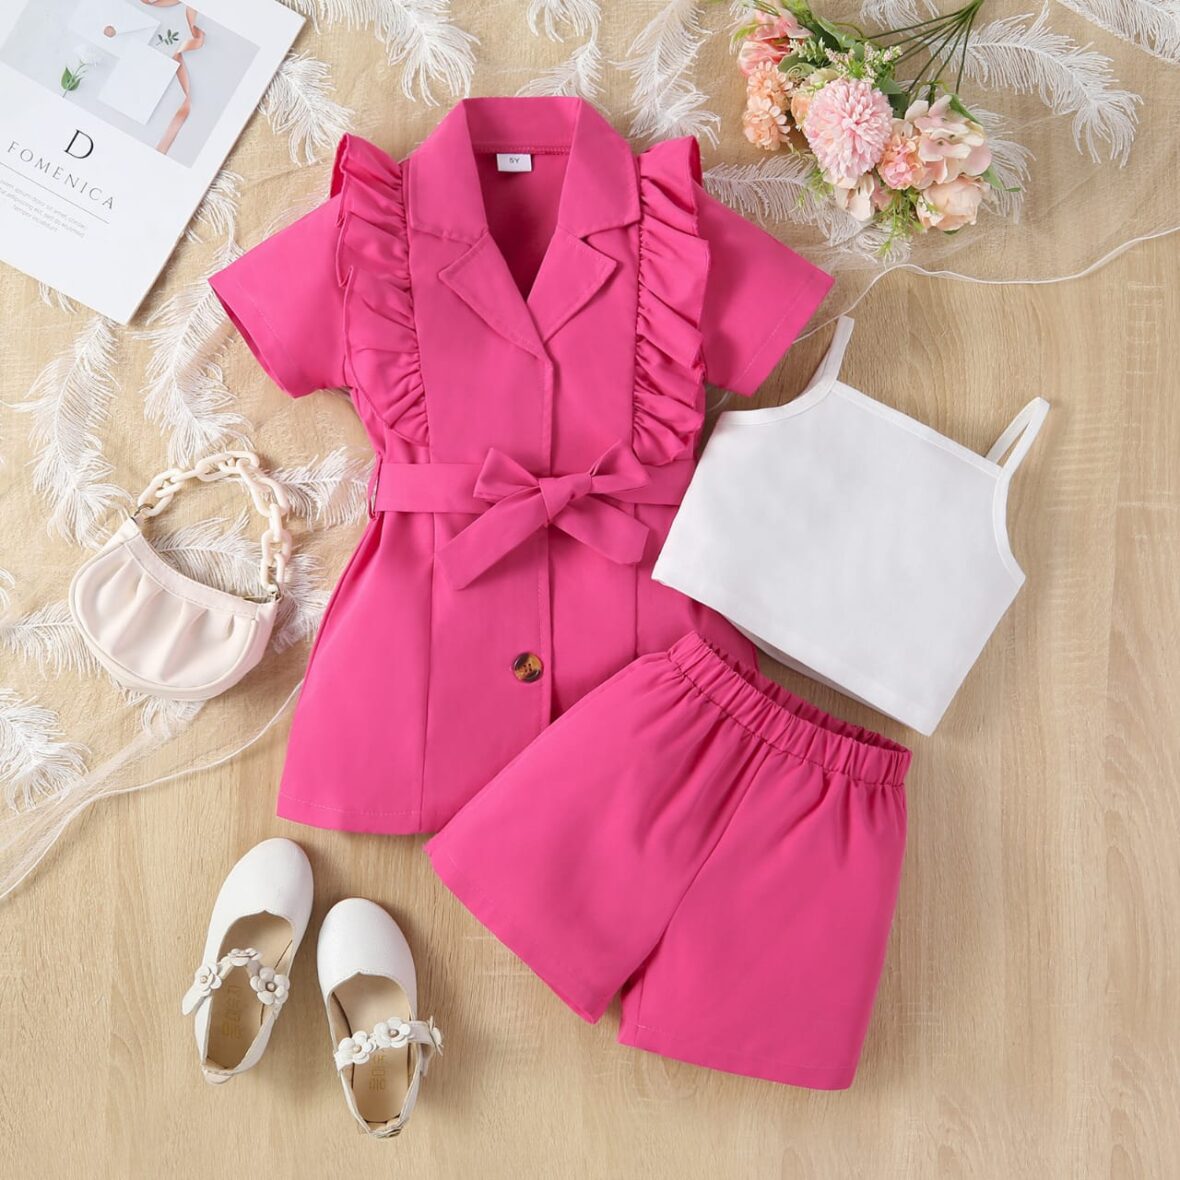 Cooperate Pink Jacket And Pink Short With White Tube Top For Toddlers ...